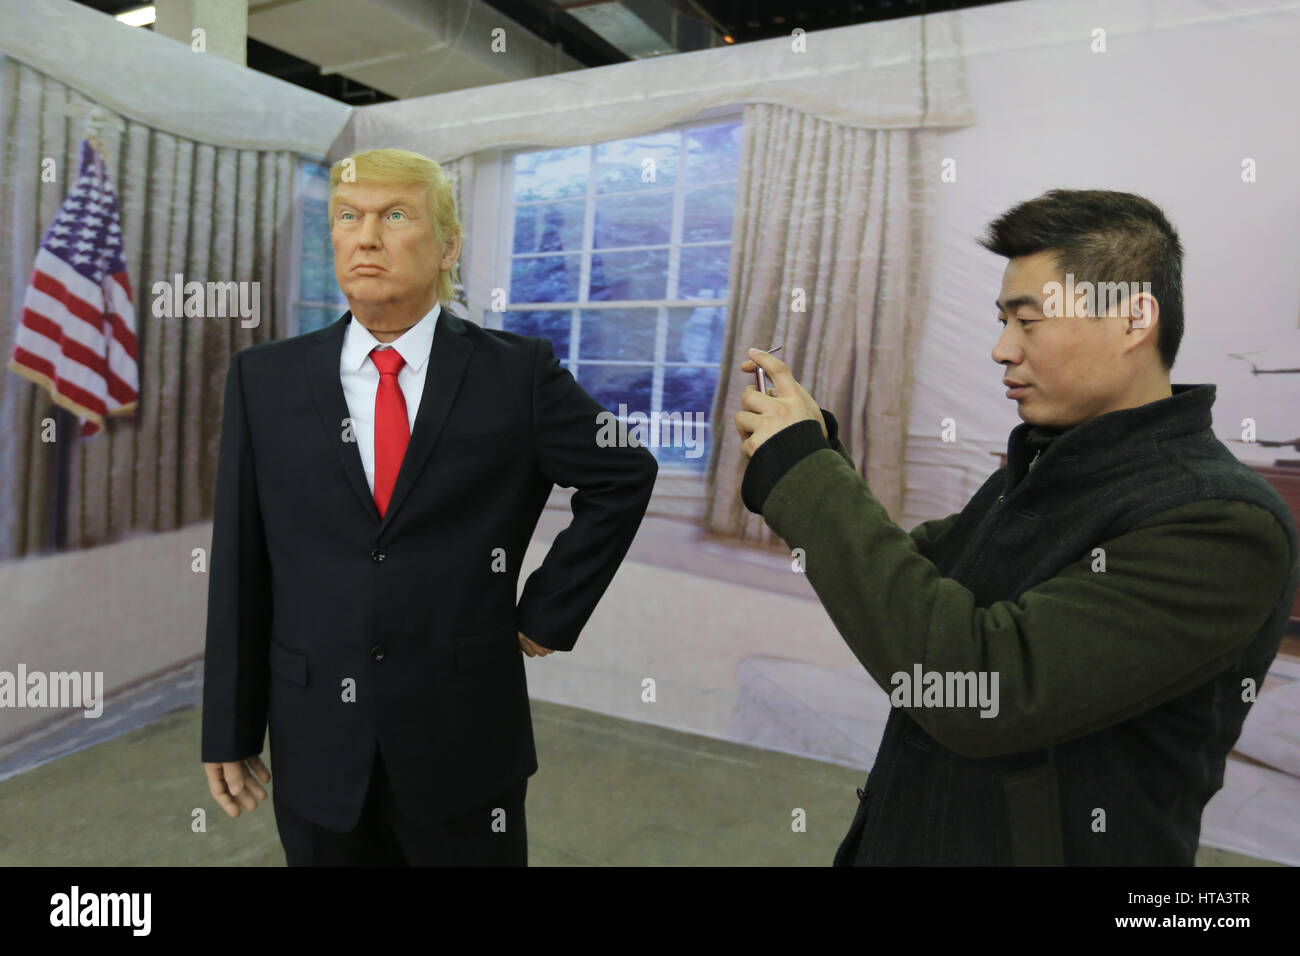 Shenyan, China. 9th Mar, 2017. A wax figure of Donald Trump at an expo in Shenyang, northeast China. Wax figures of Chinese and international celebrities can be seen at an expo in Shenyang, northeast China's Liaoning Provice, March 9th, 2017. Credit: SIPA Asia/ZUMA Wire/Alamy Live News Stock Photo